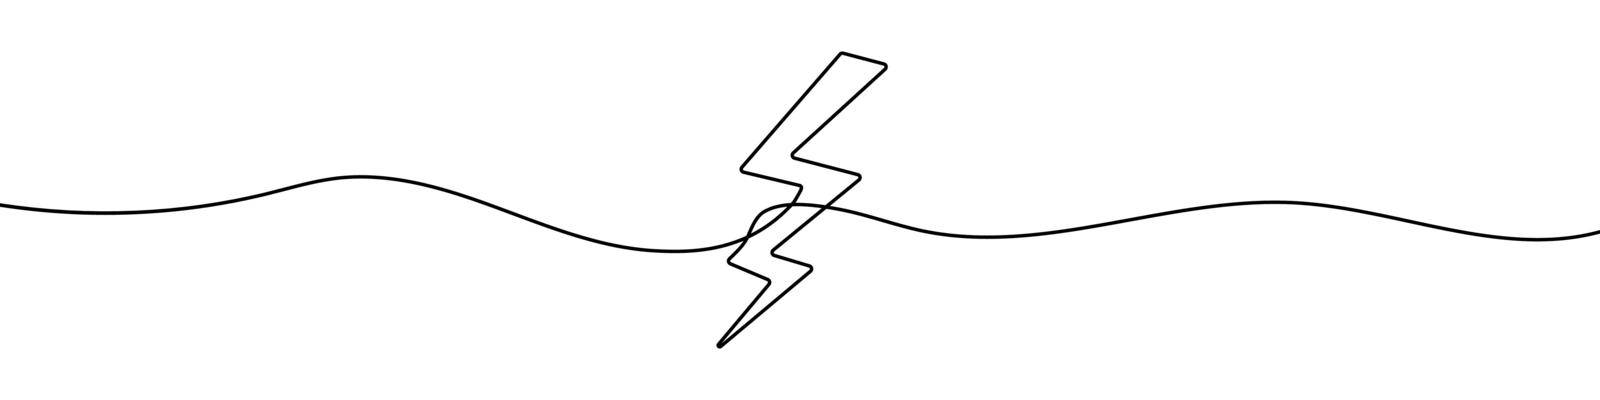 Continuous line drawing of lightning. Lightning line icon. One line drawing background. Lightning continuous line icon by Chekman